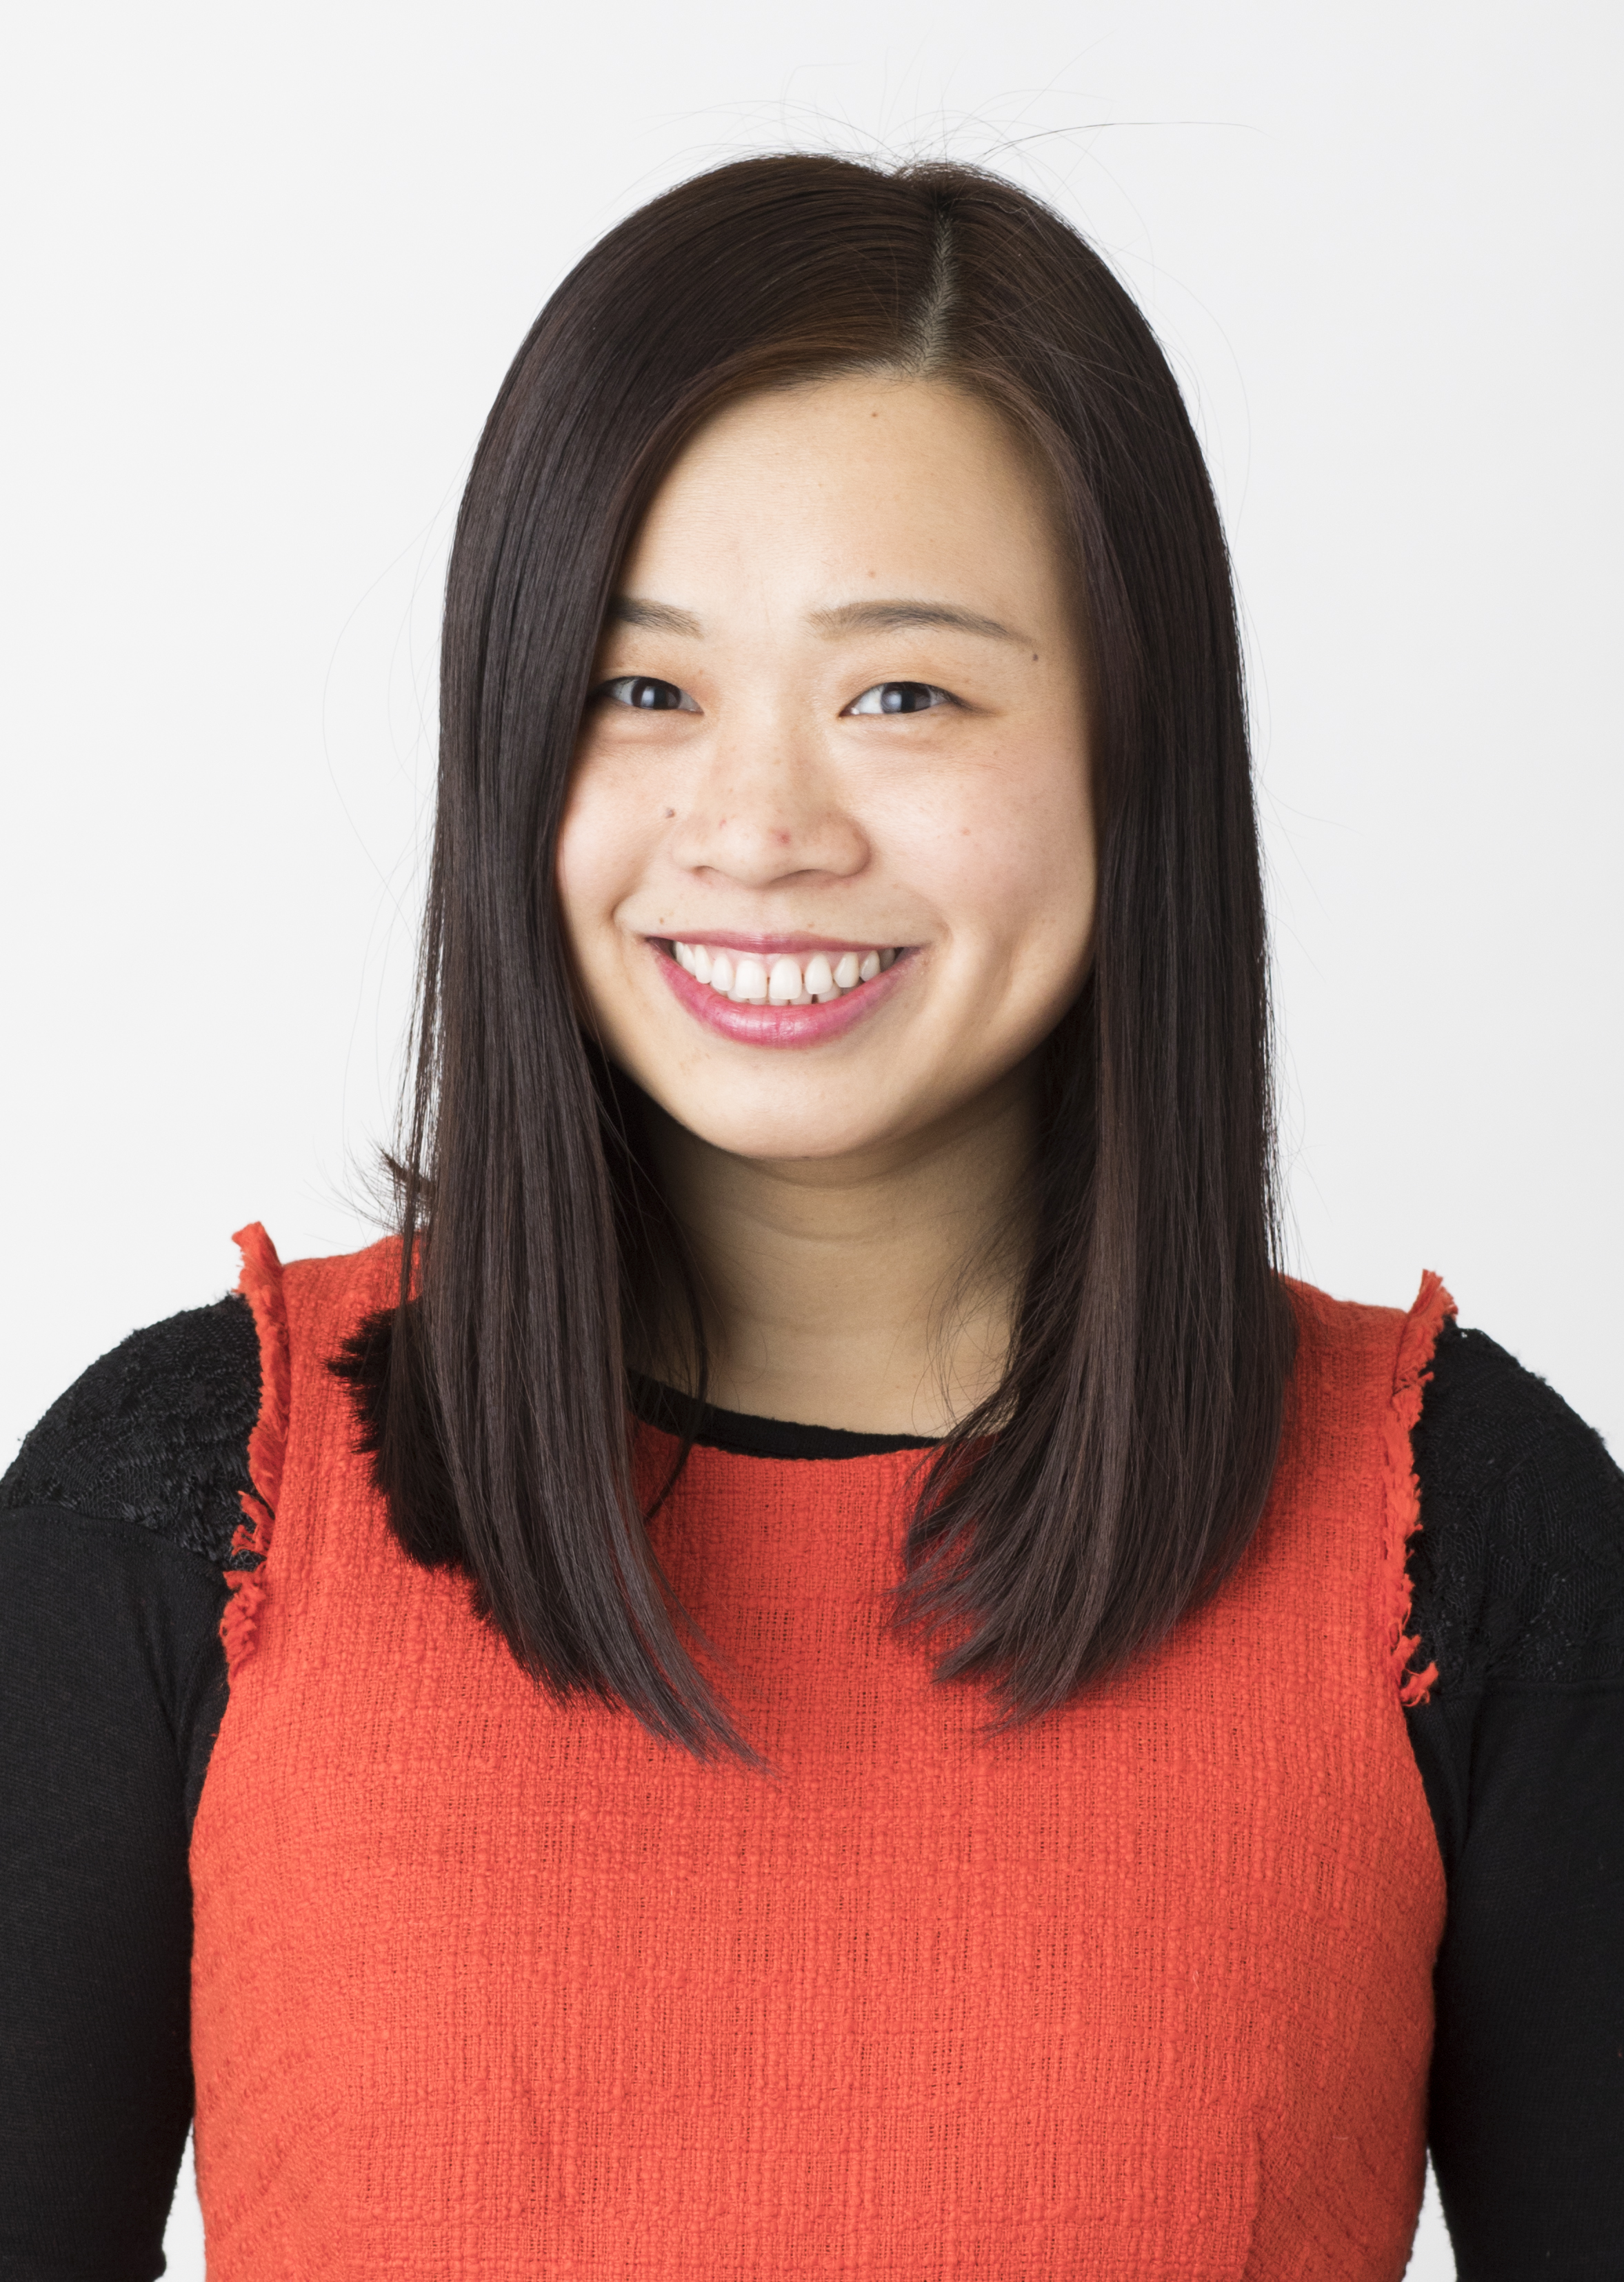 W&M Assistant Professor Ting Huang